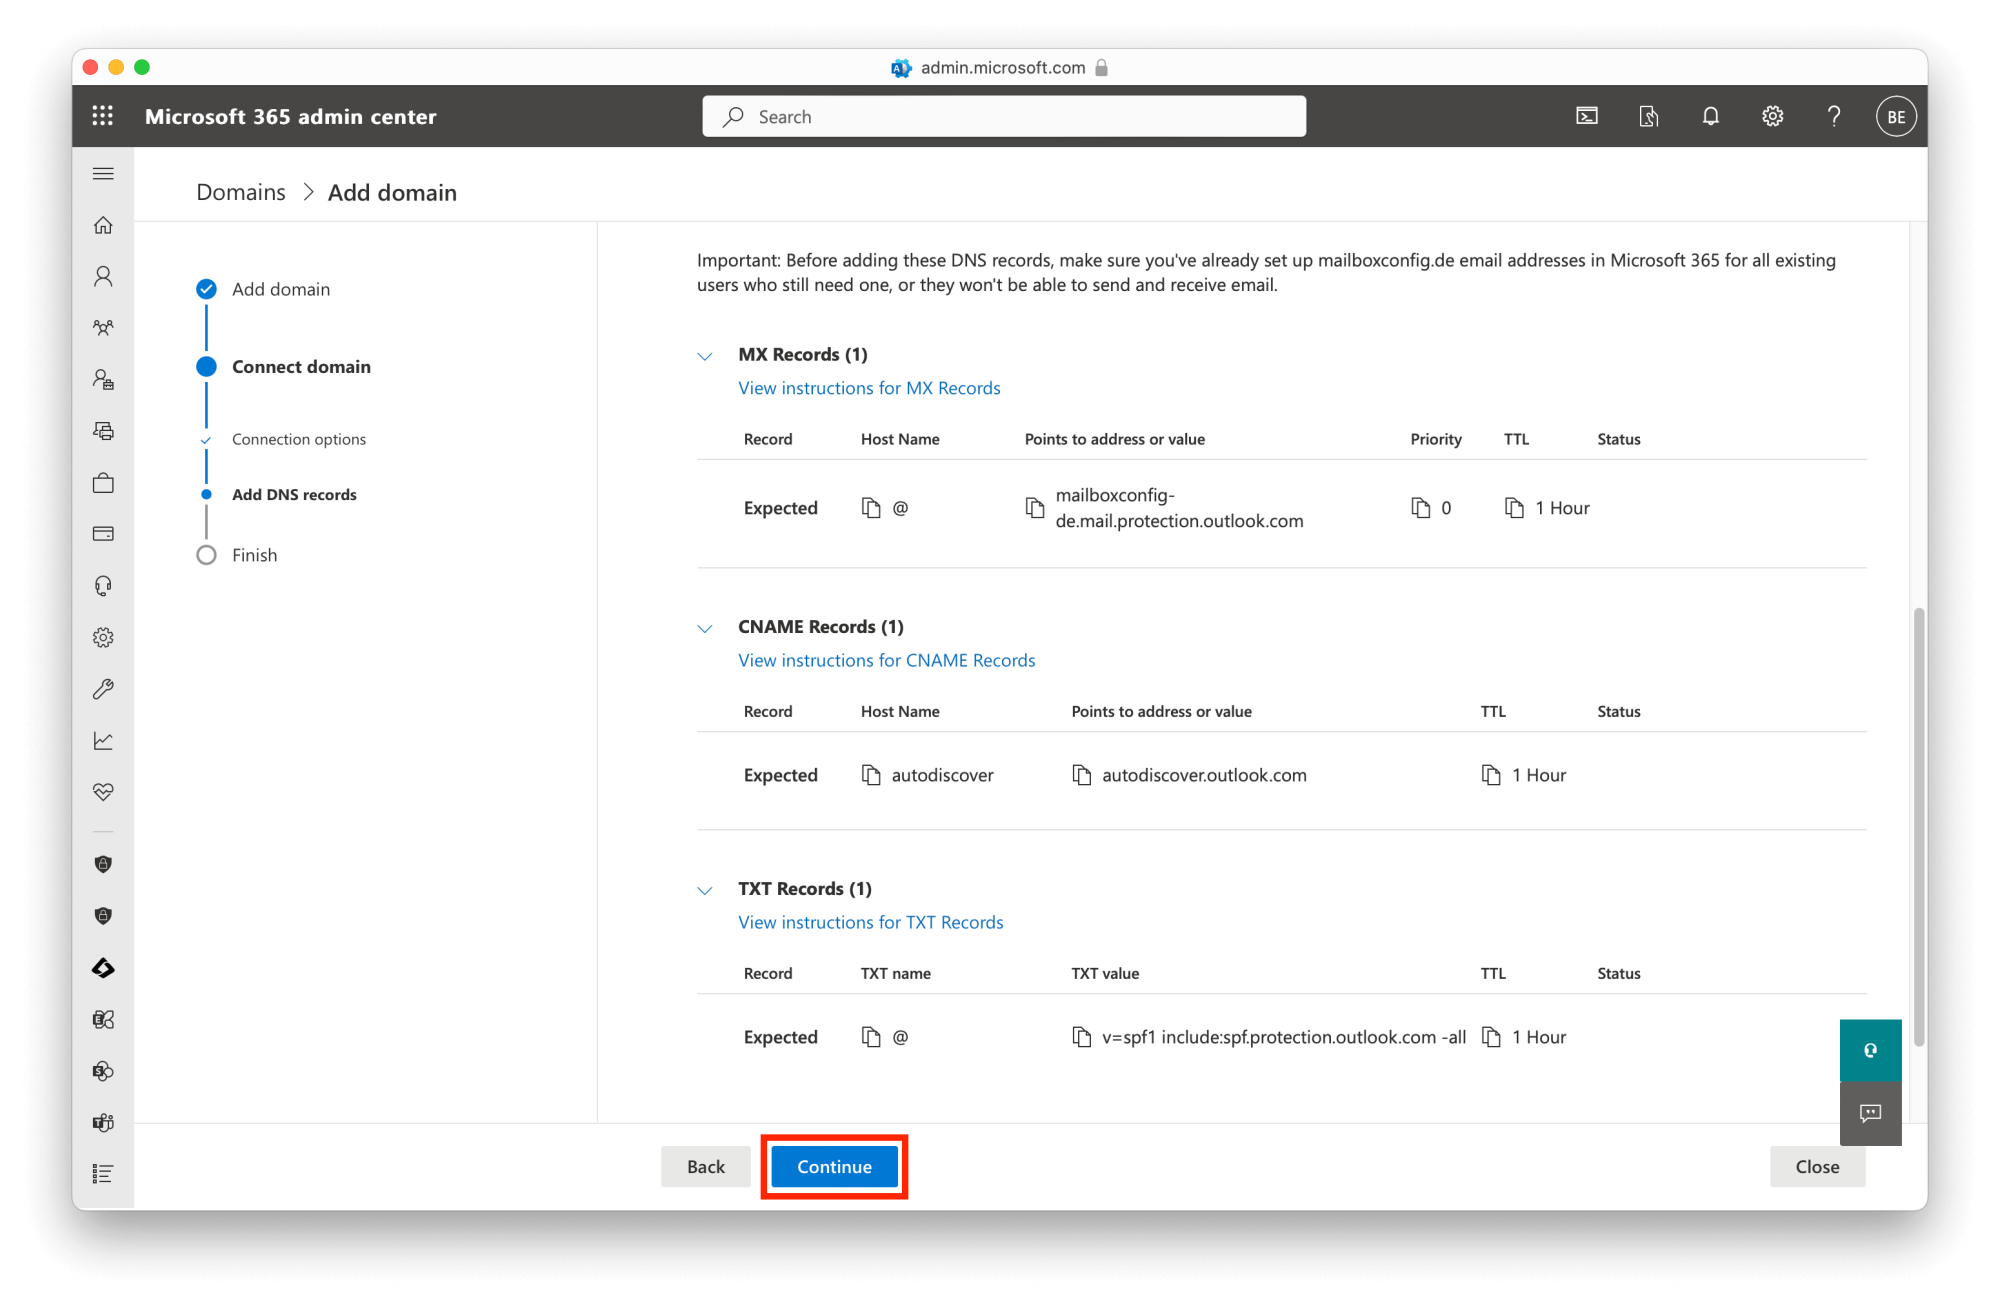 Migrate from GoDaddy to Office 365: Connect Domain